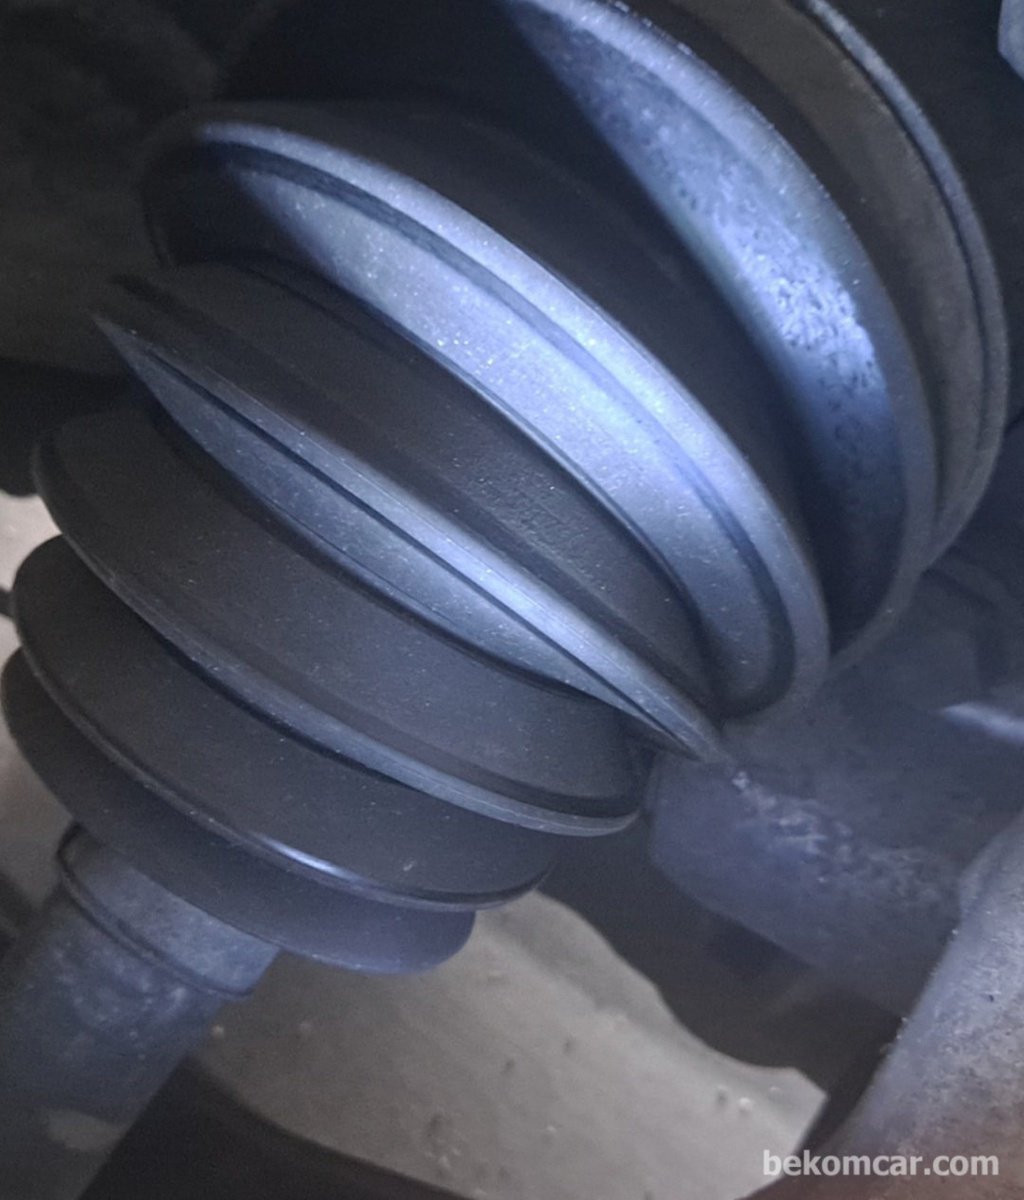 Used car inspection of CV axle boots grease leak and tear|bekomcar.com